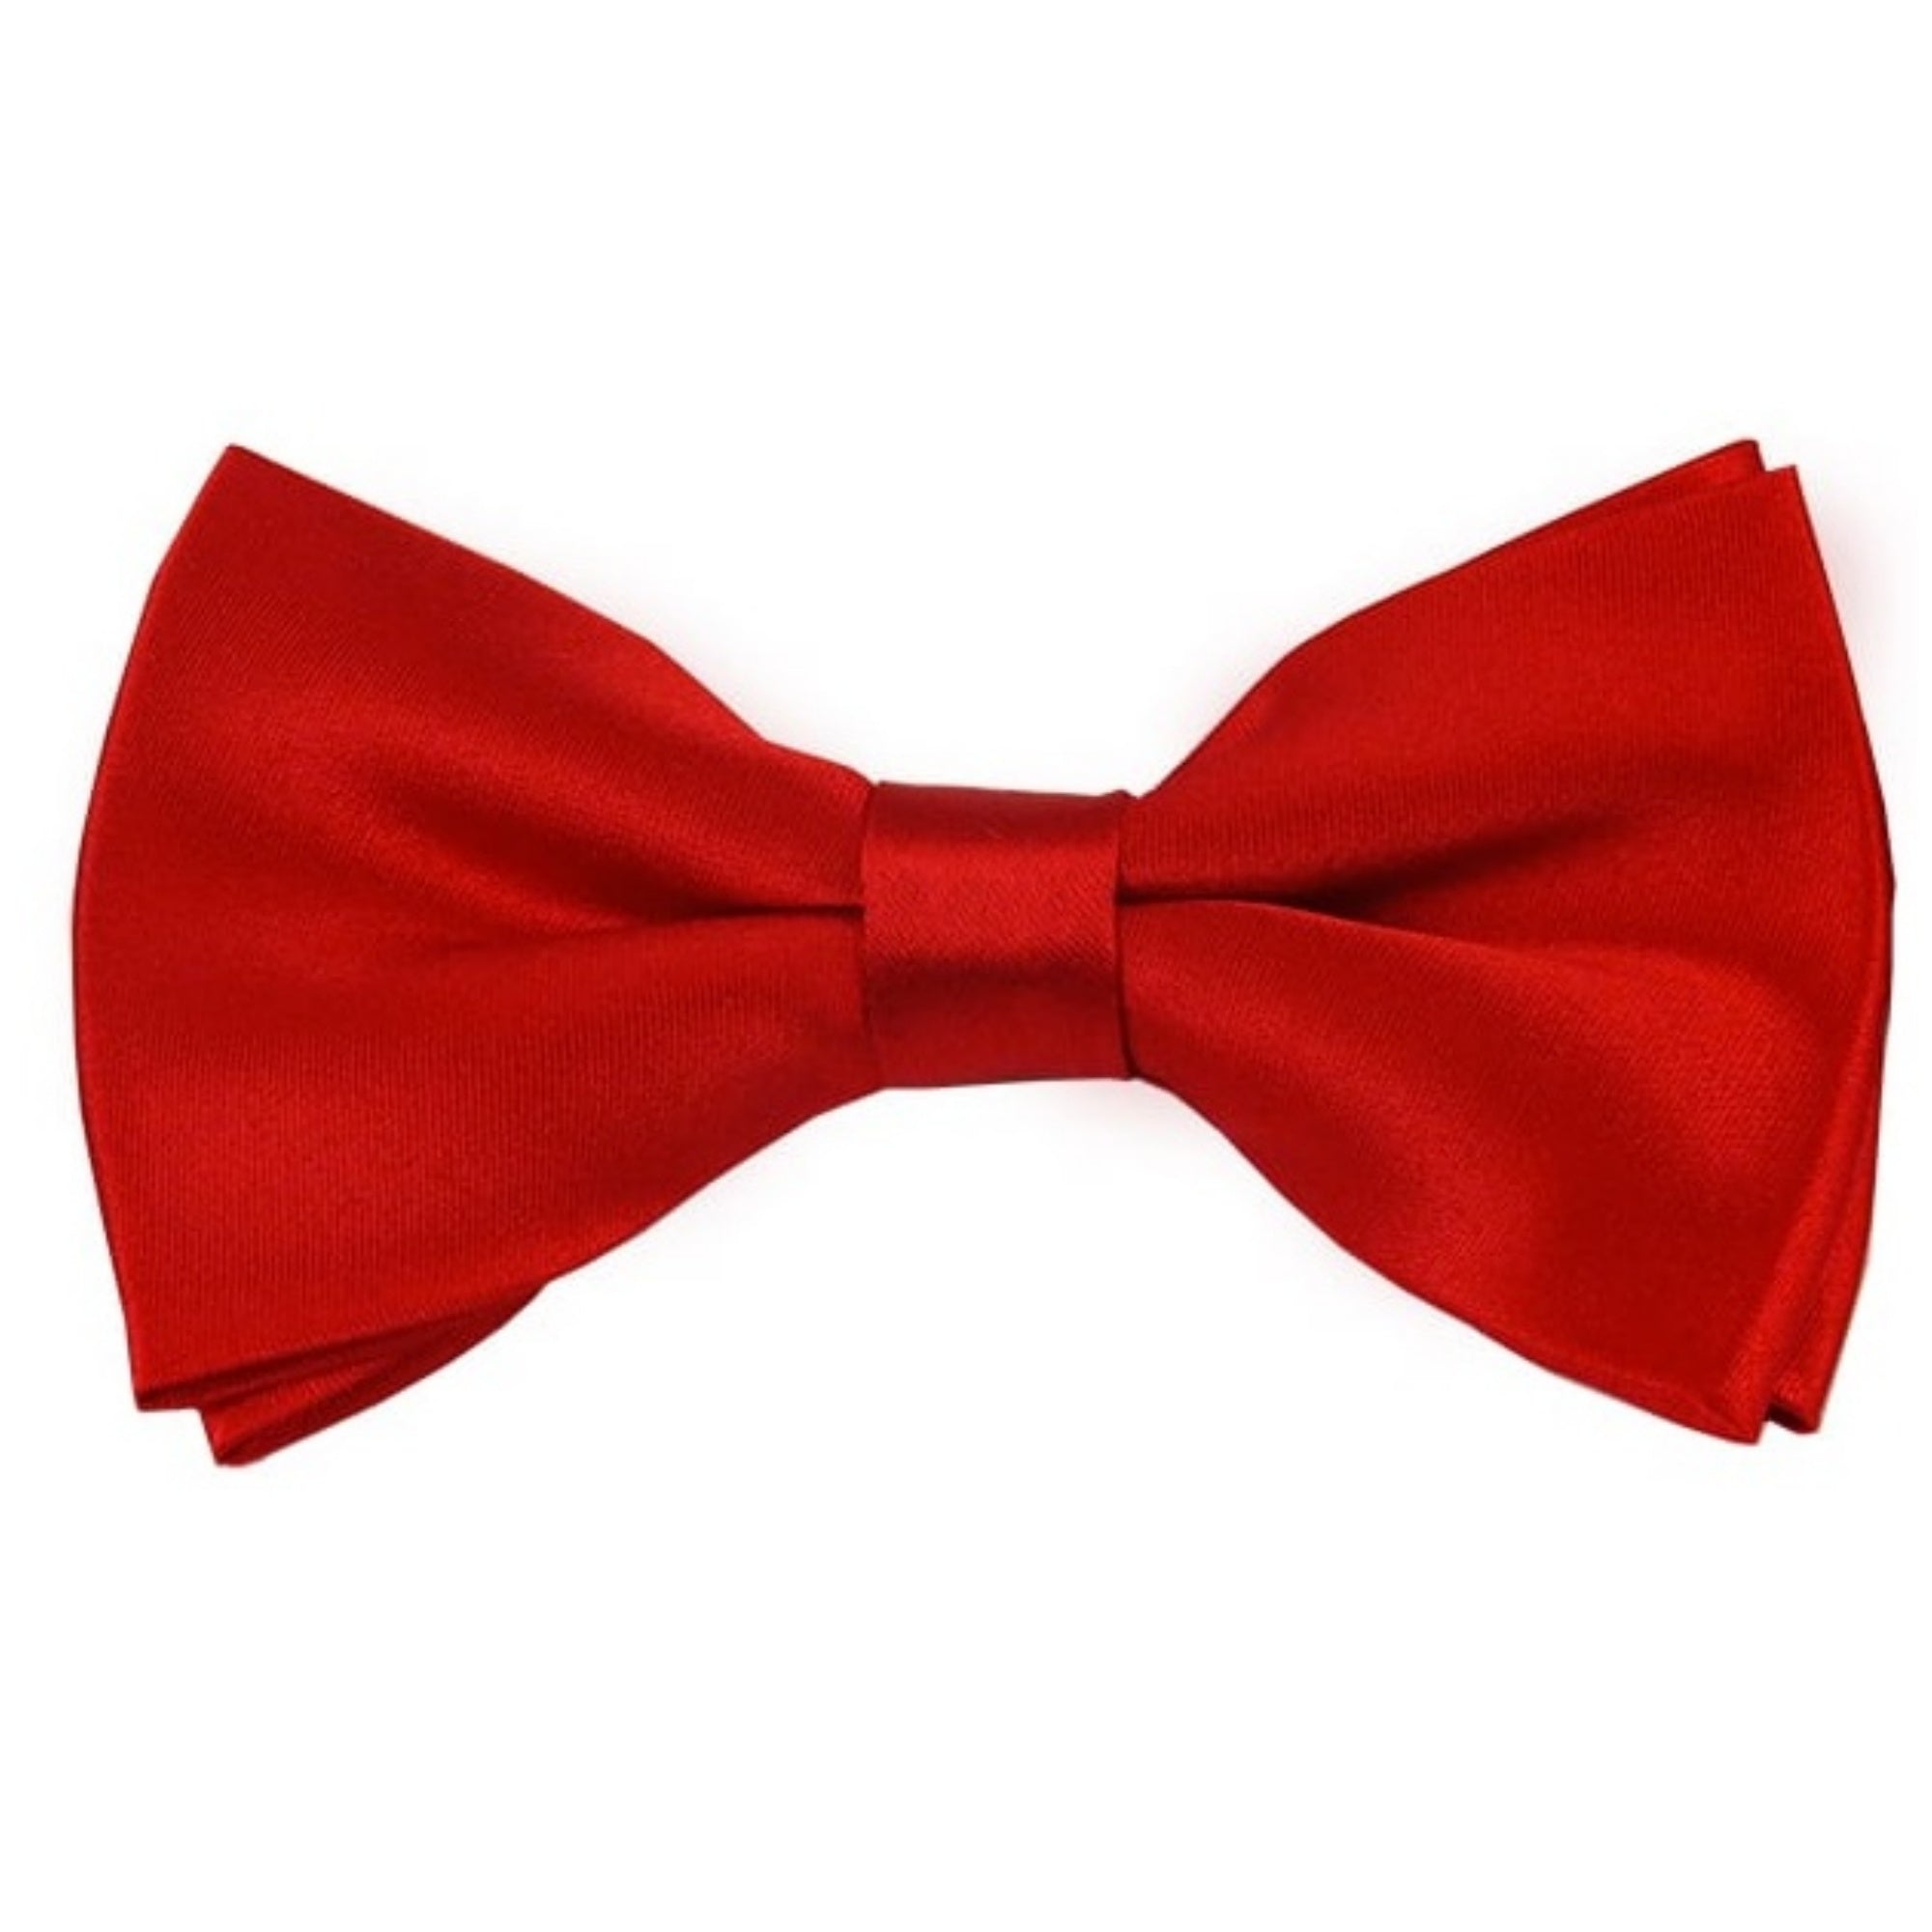 TheDapperTie Men's Solid Color 2.5 W And 4.5 L Inch Pre-Tied adjustable Bow Ties Men's Solid Color Bow Tie TheDapperTie Red  